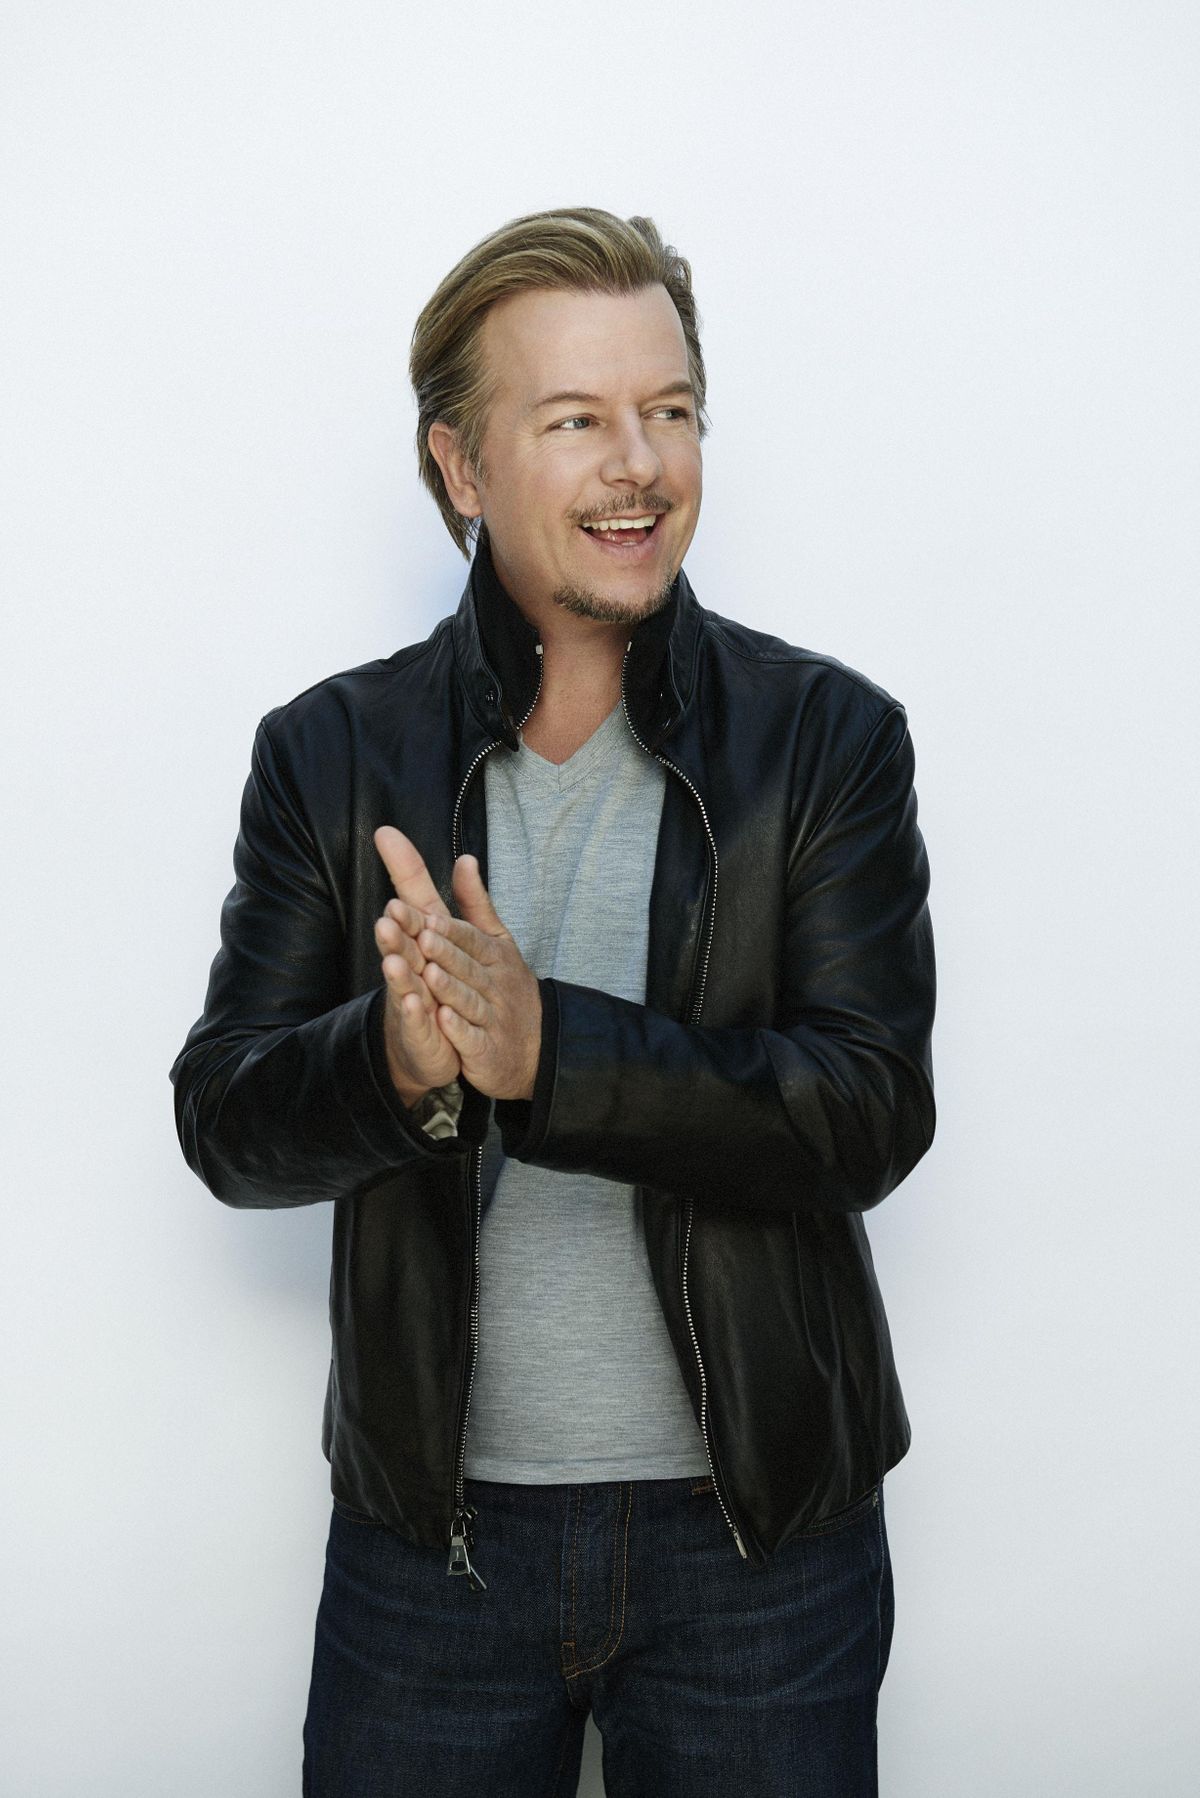 SHOW POSTPONED, STAY TUNED FOR UPDATES: David Spade